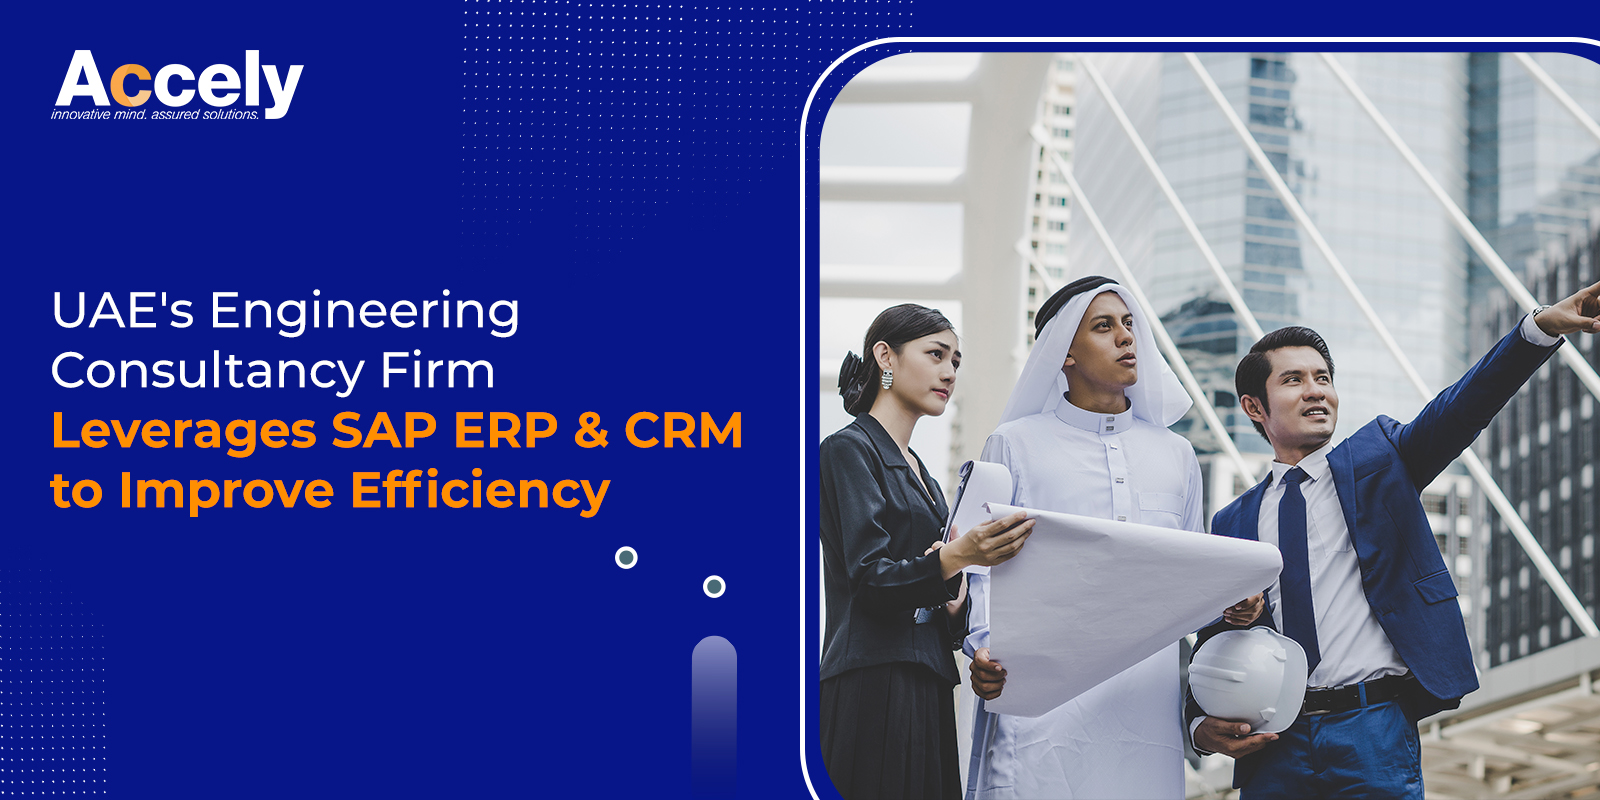 UAE's Engineering Consultancy Firm Leverages SAP ERP & CRM to Improve Efficiency